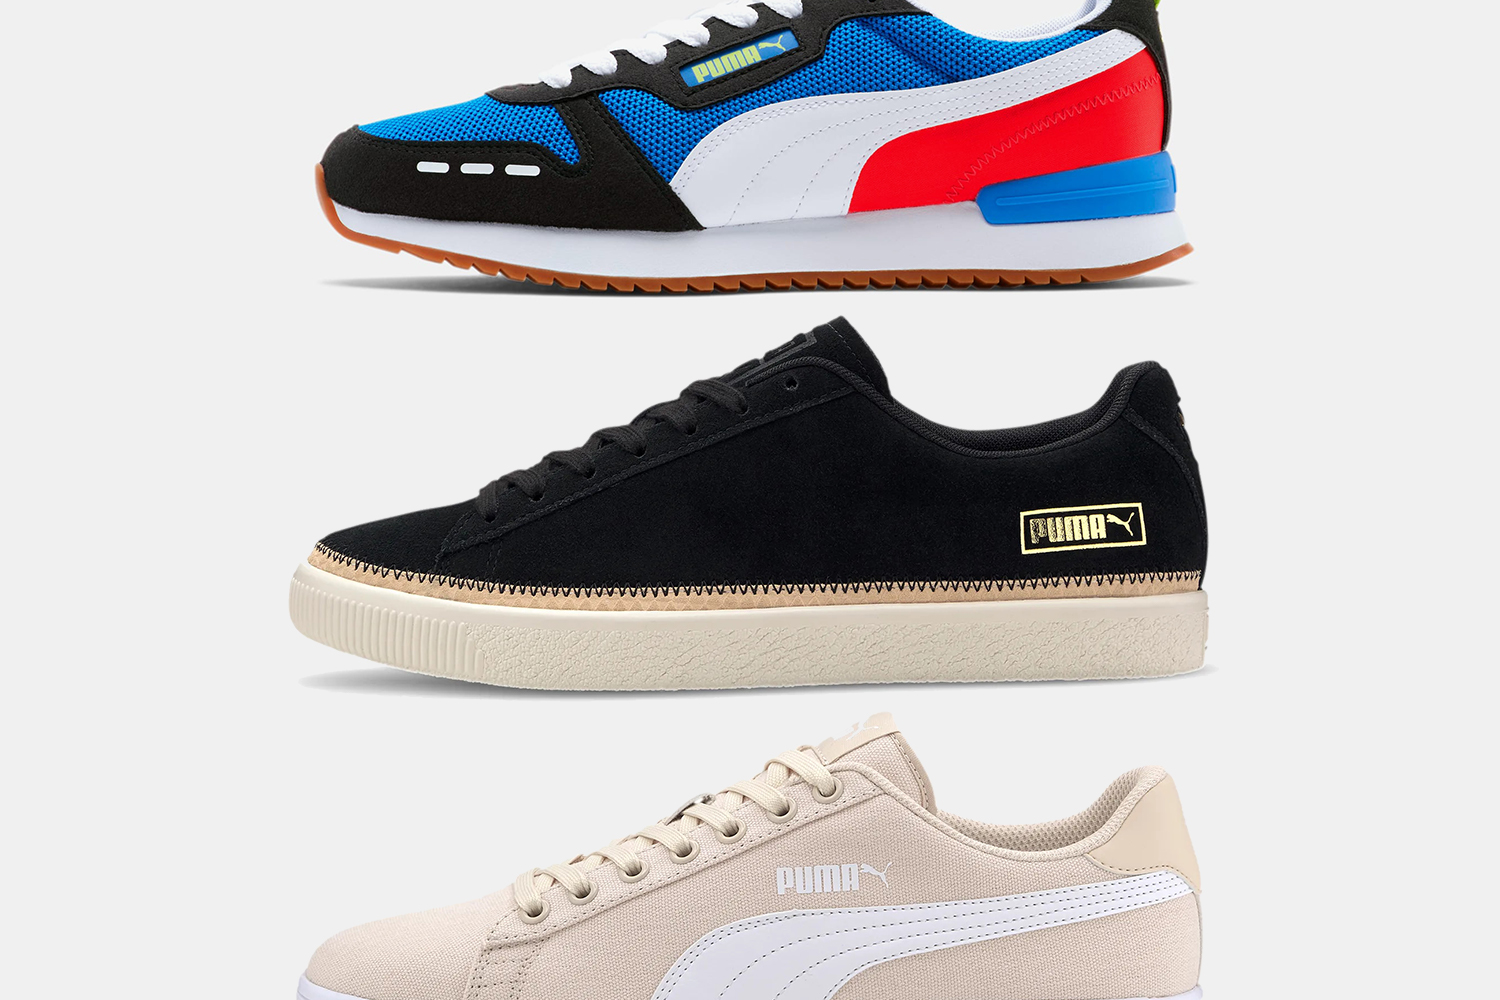 Puma Sneakers Are Up to 70% Off During the Private Sale - InsideHook